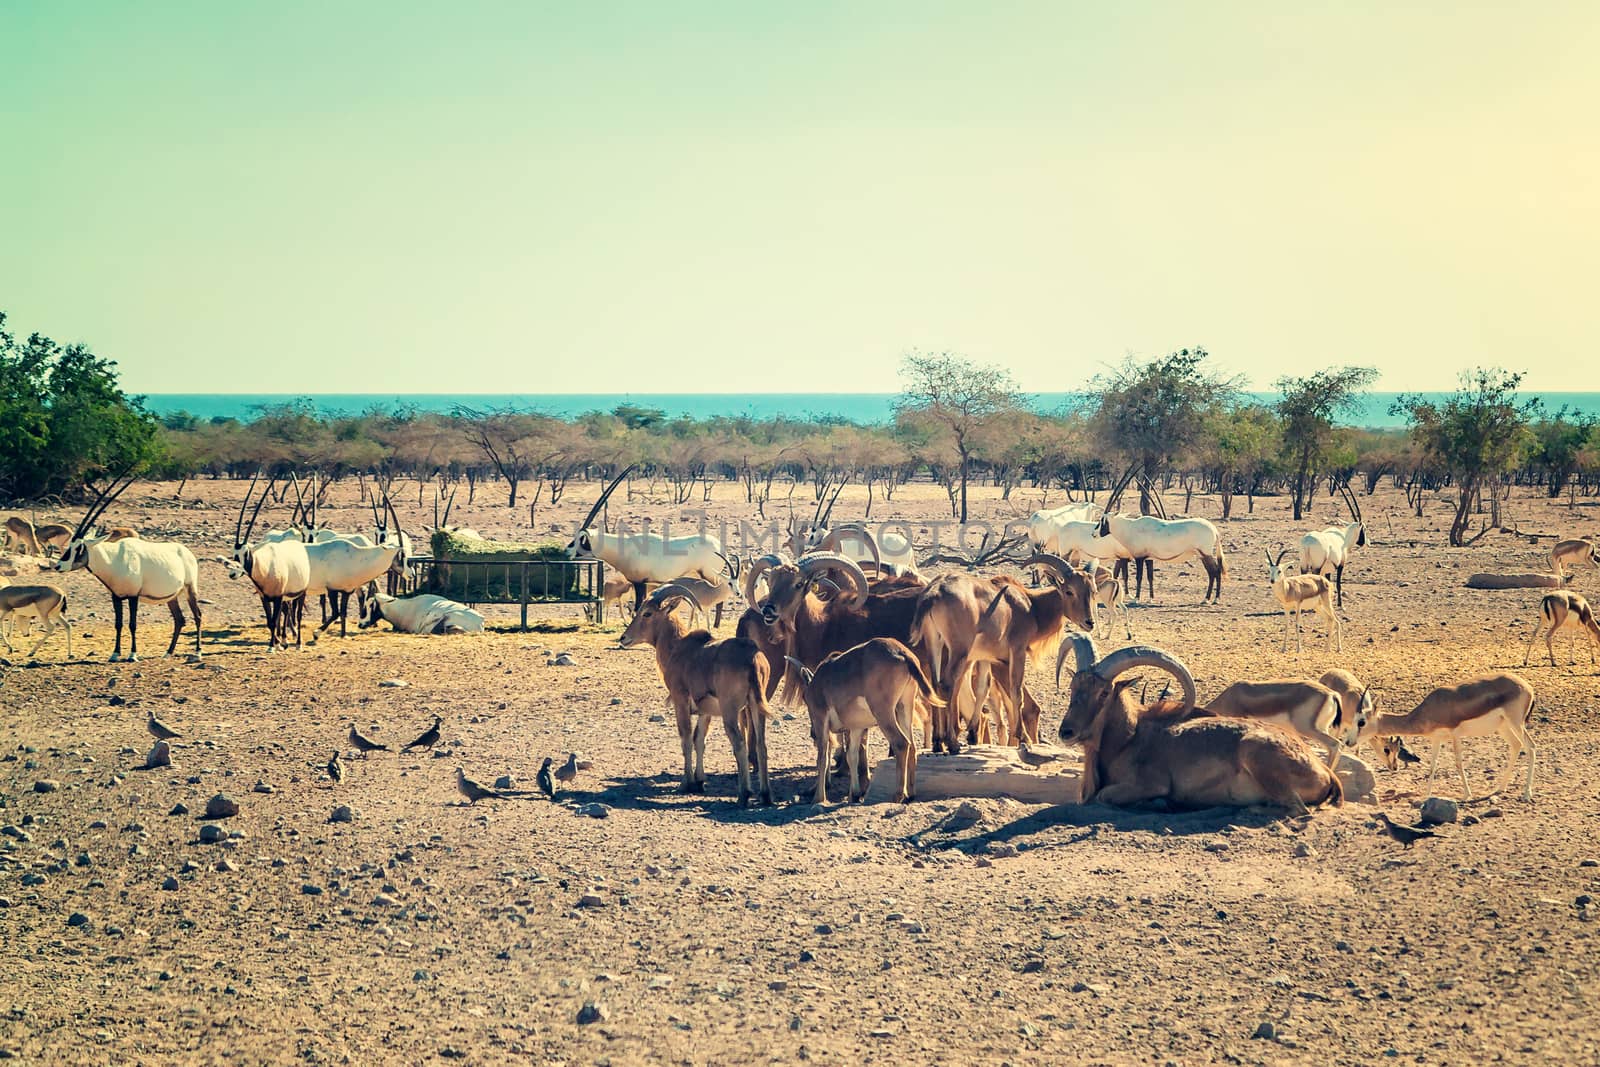 Group of antelopes and mountain sheep in a safari park on the island of Sir Bani Yas, United Arab Emirates by galsand